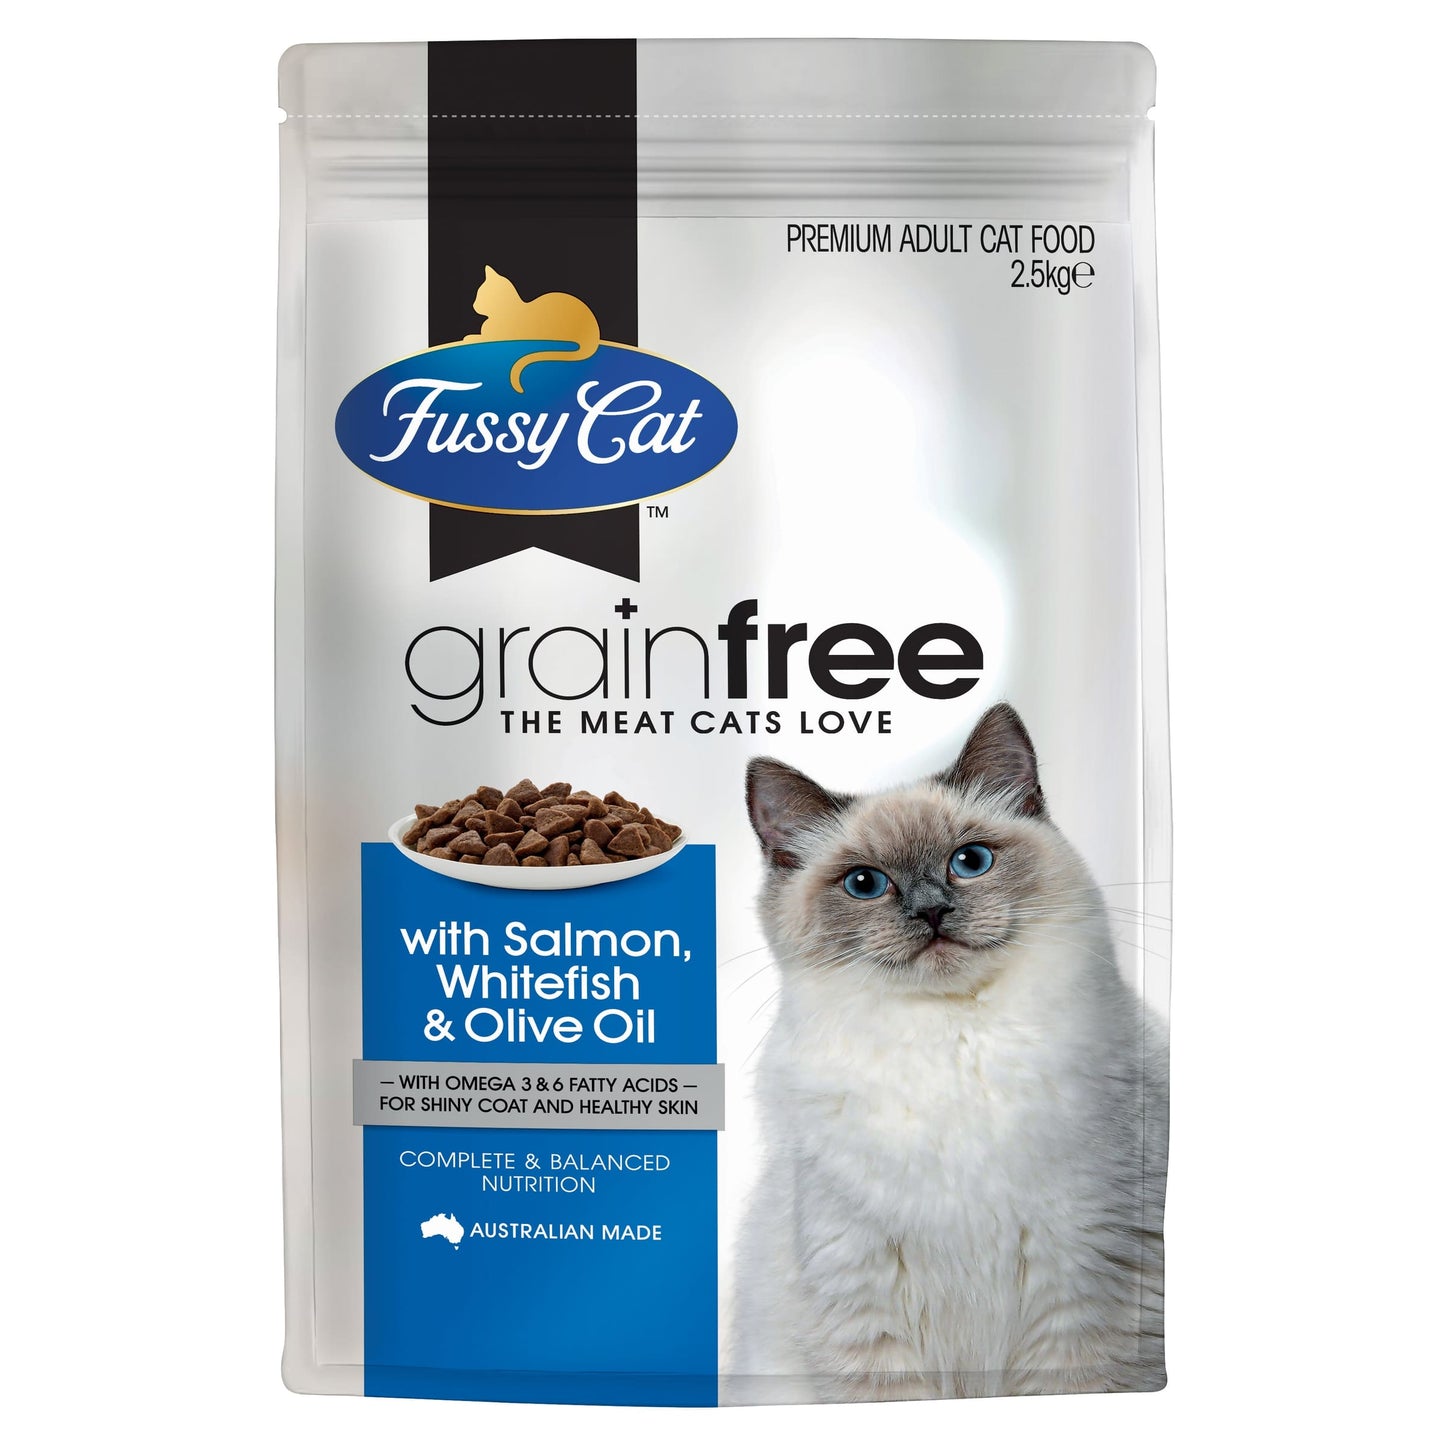 Fussy Cat Adult Grain Free Salmon, Whitefish & Olive Oil 2.5kg x 4